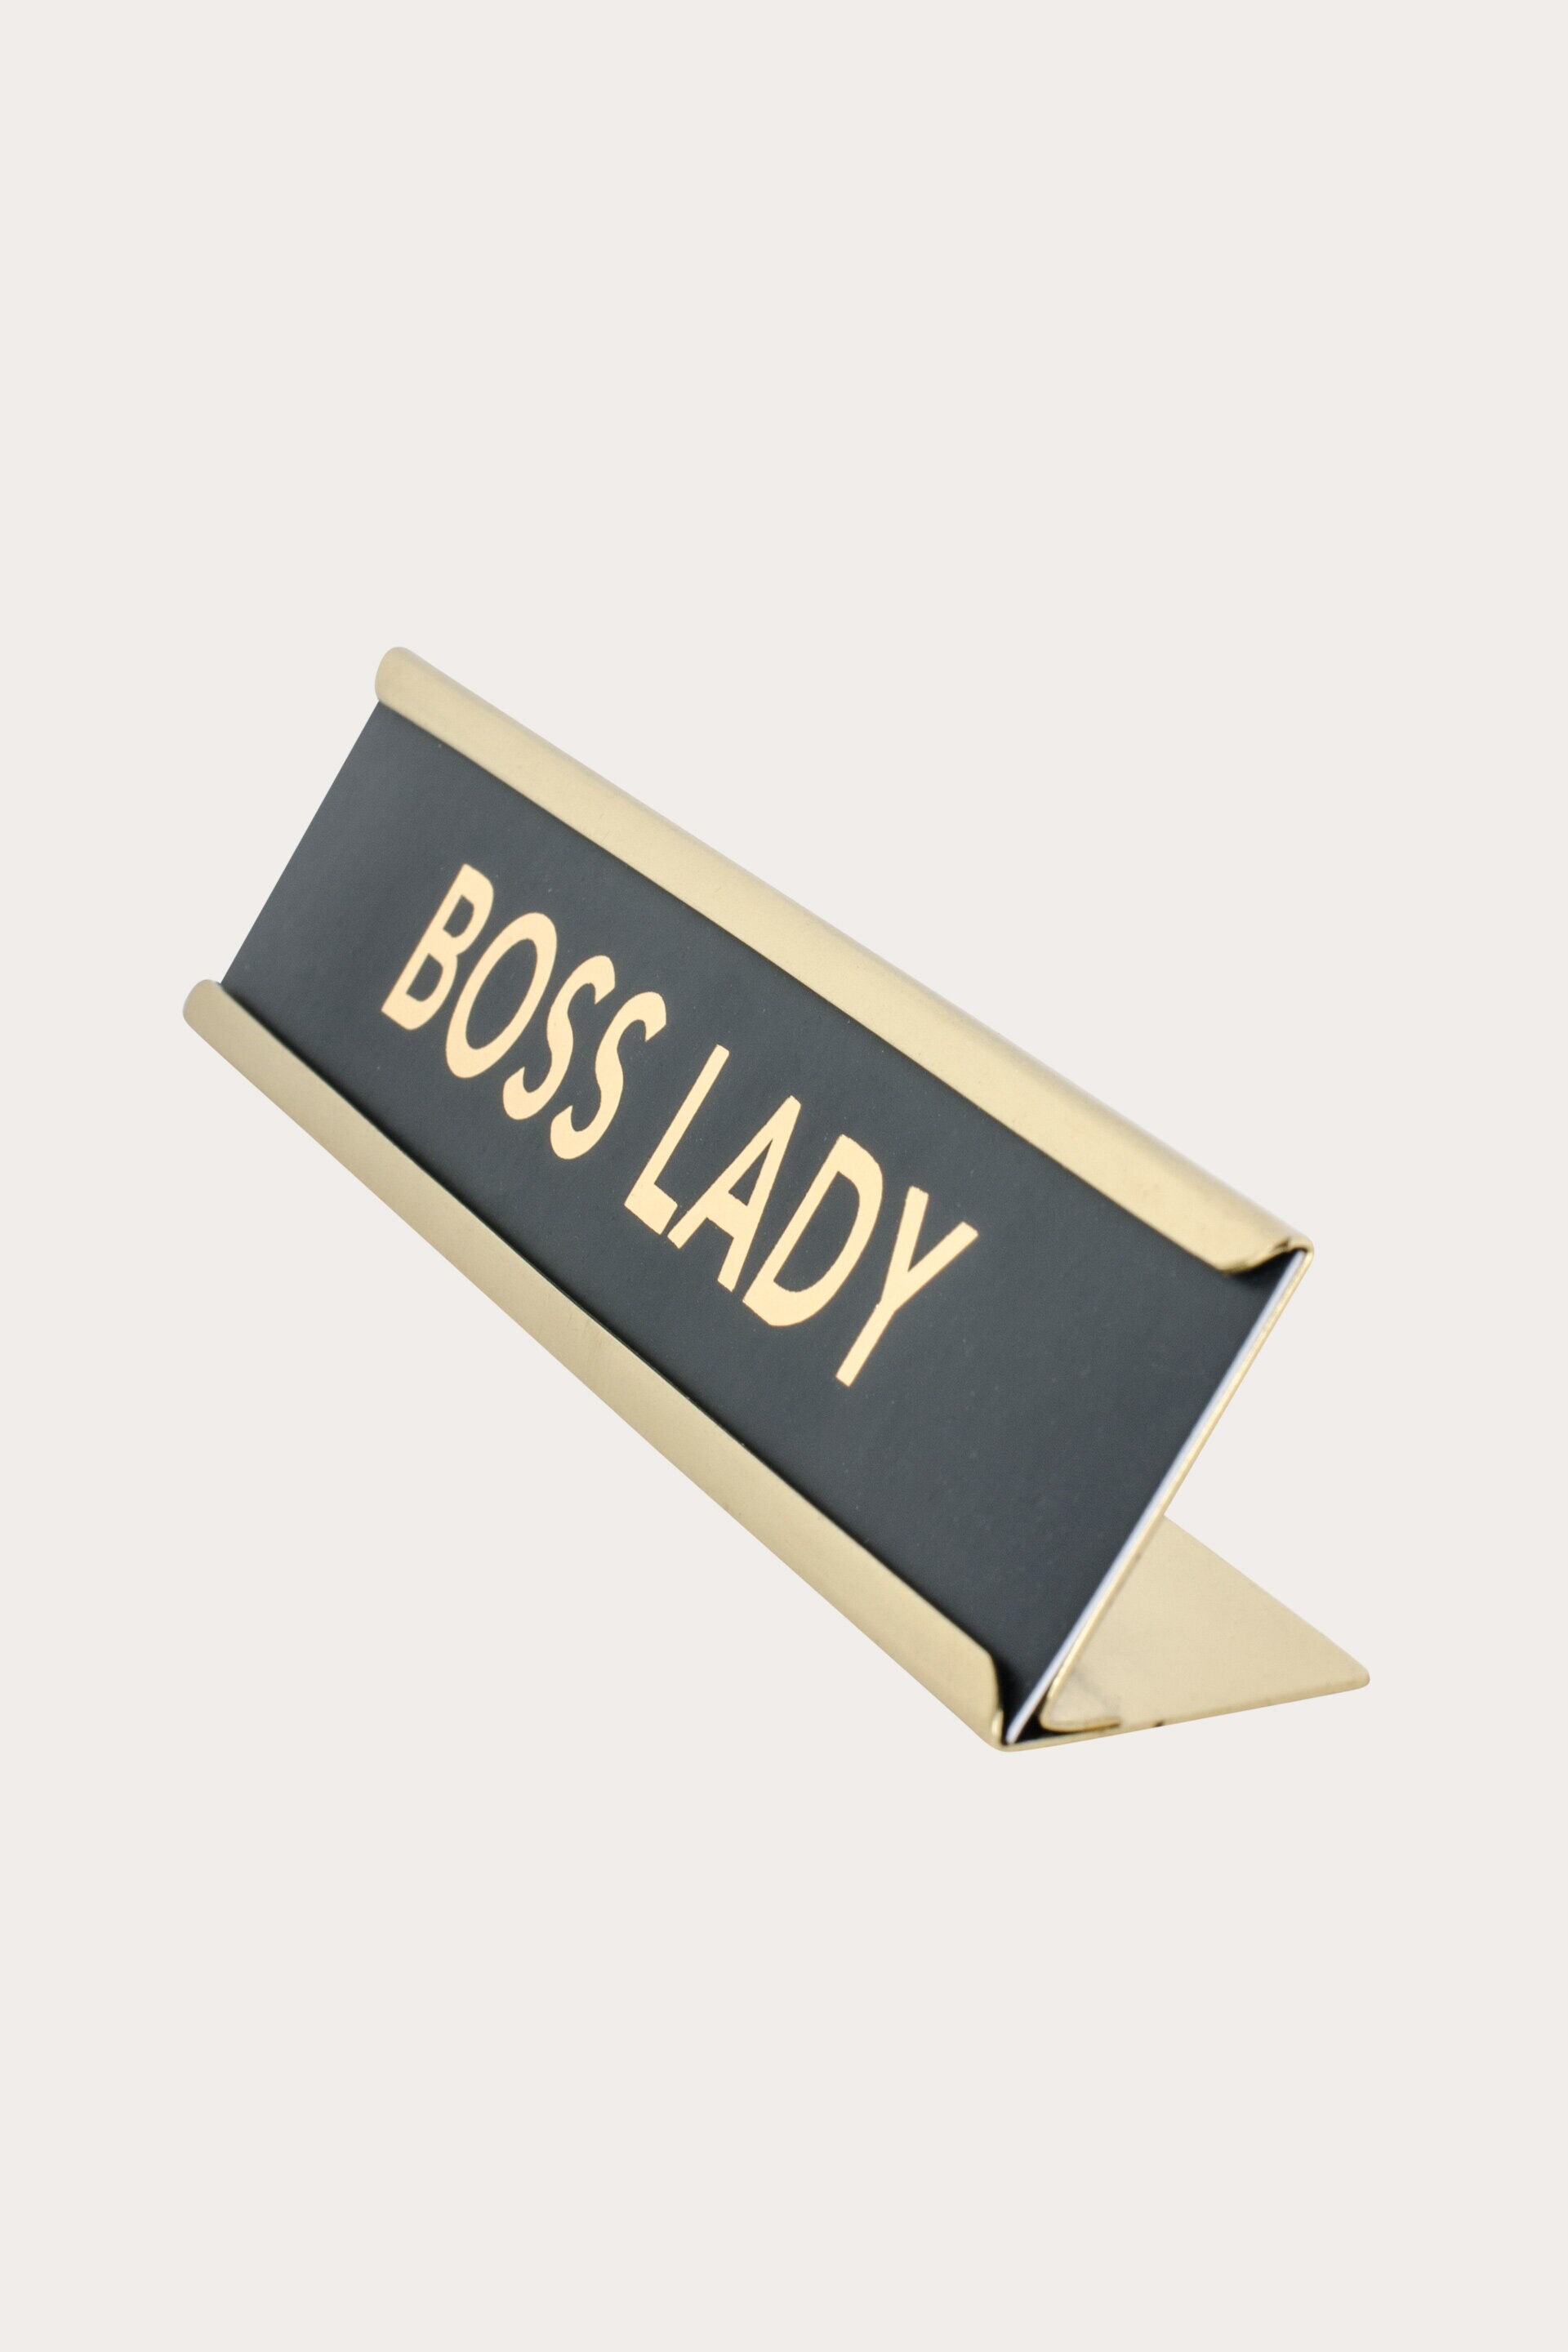 BOSS LADY table sign